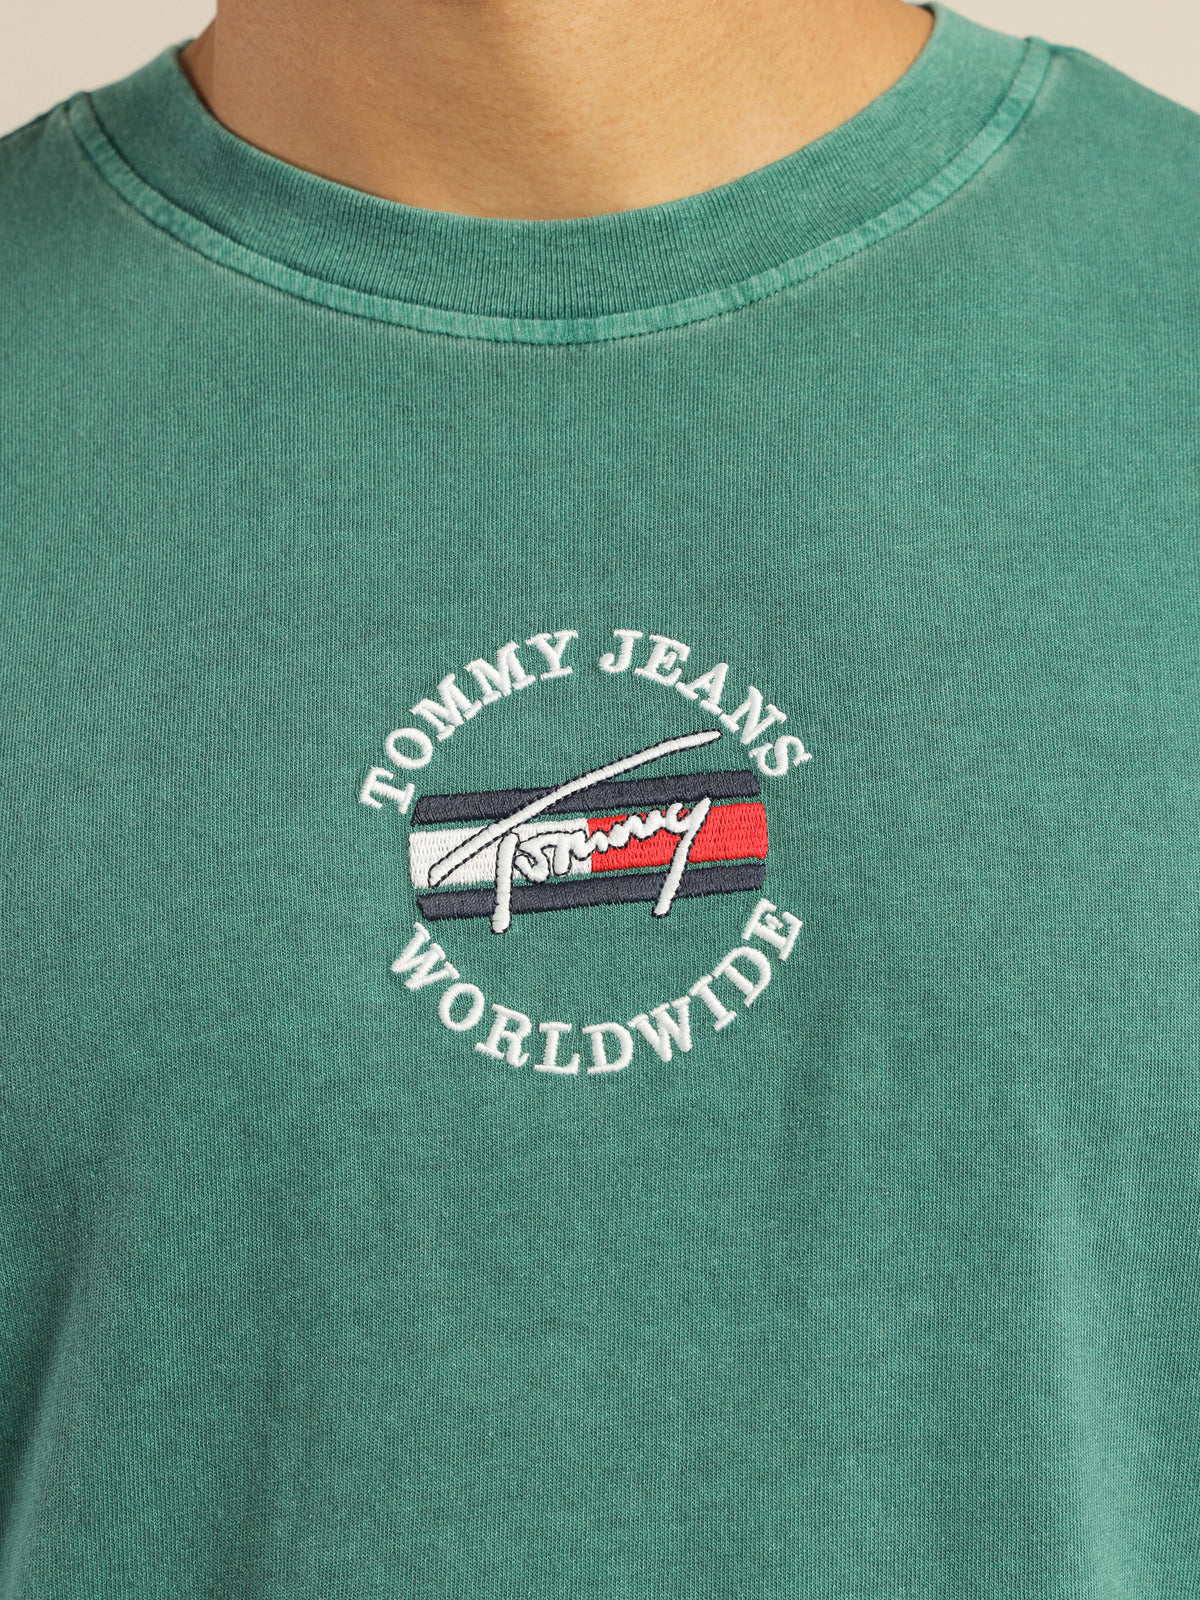 Timeless Tommy 2 T-Shirt in Rural Green